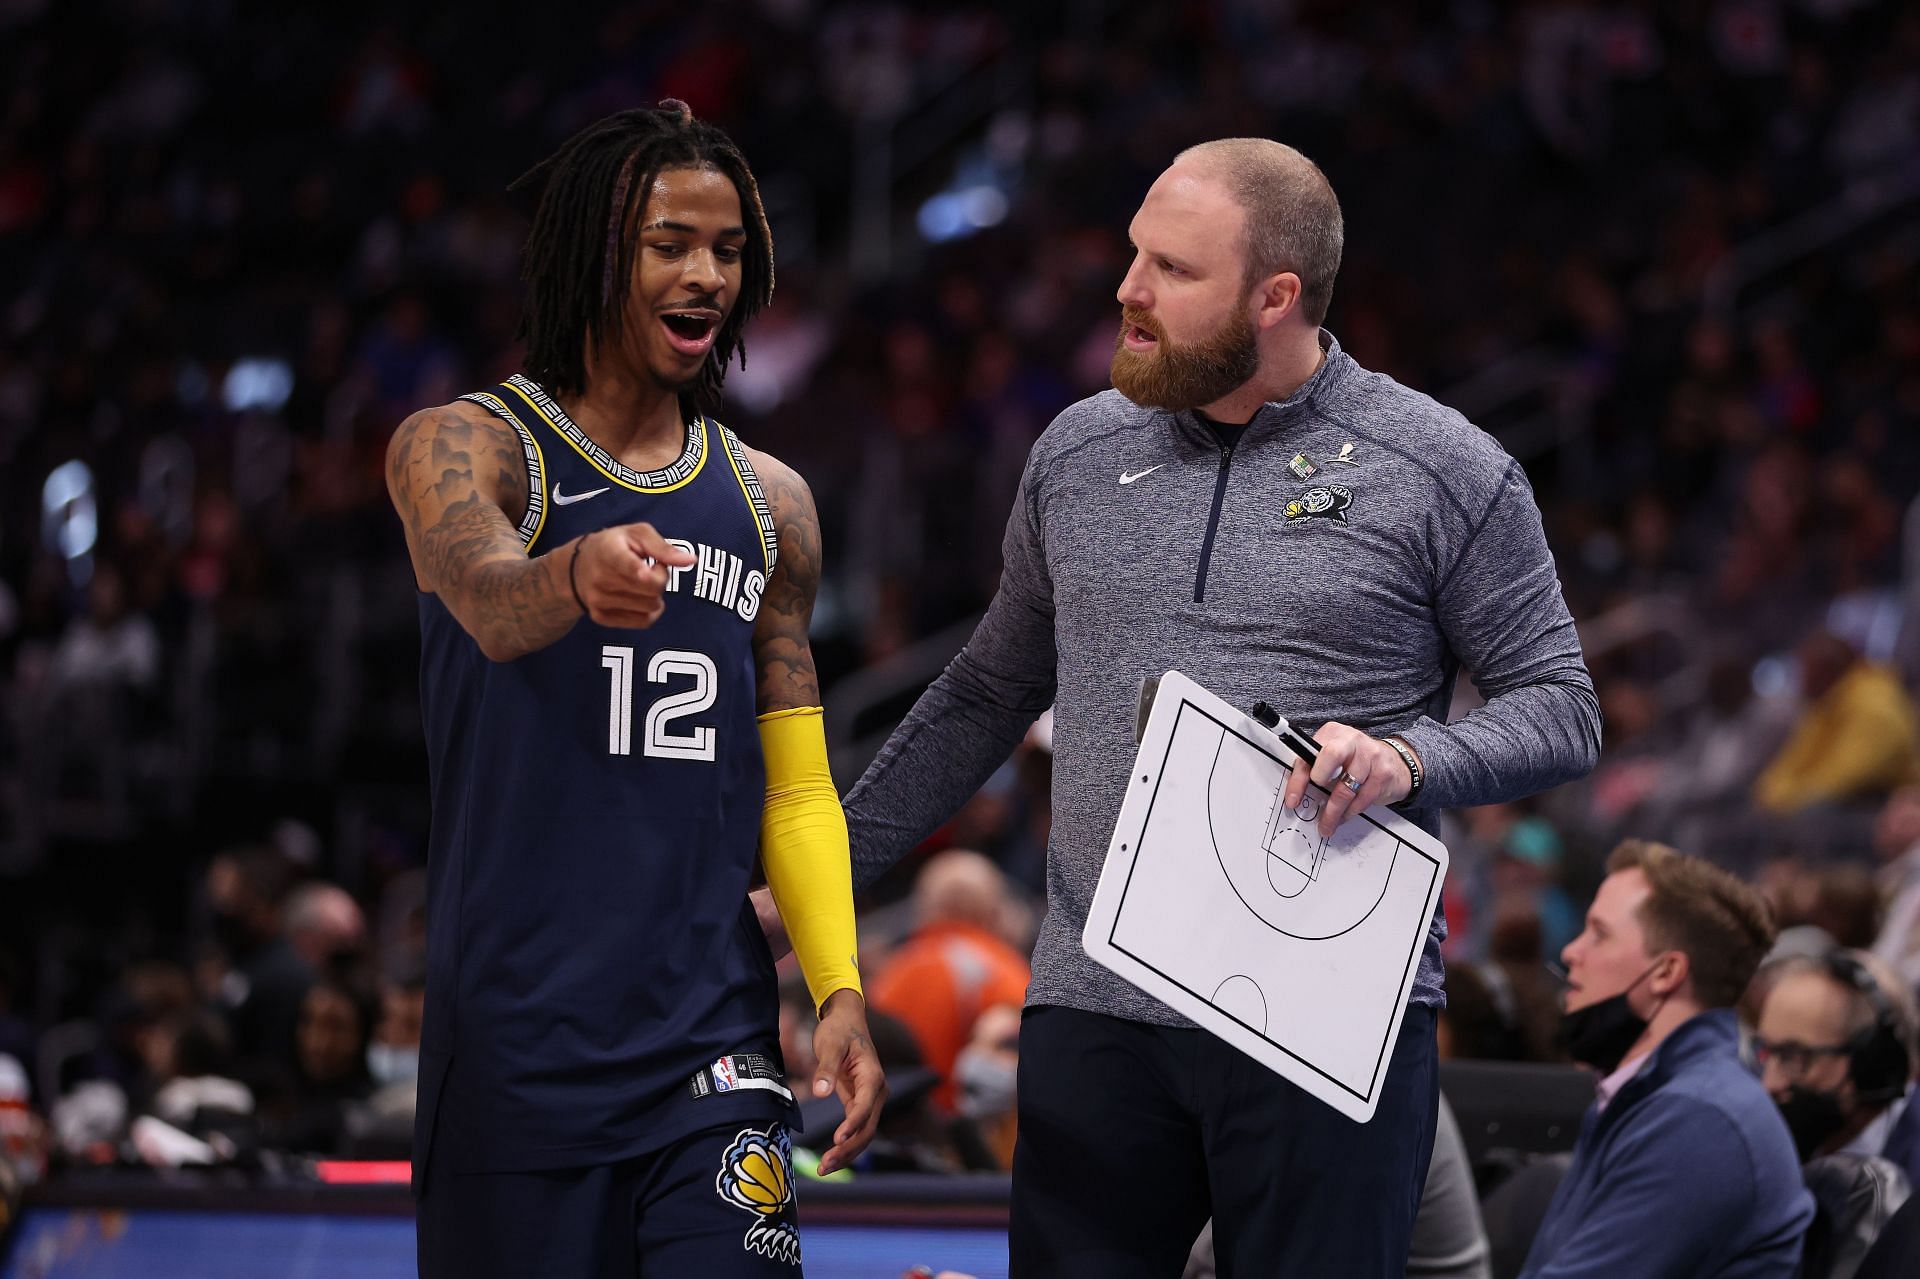 Ja Morant Gets Statement Of Support From Nike Amid NBA Investigation, News